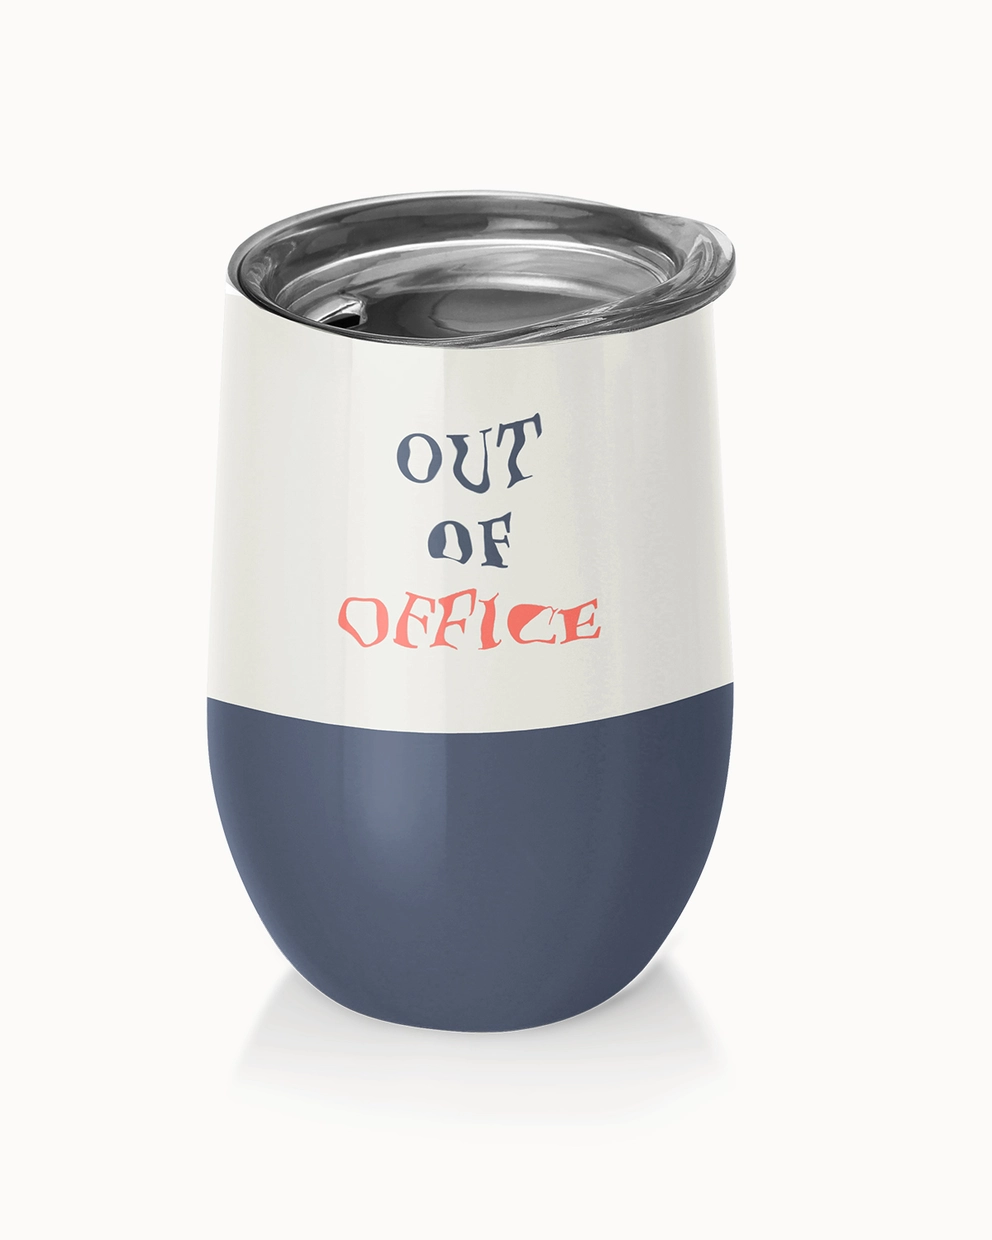 chic.mic - bioloco office cup - "Out of office"